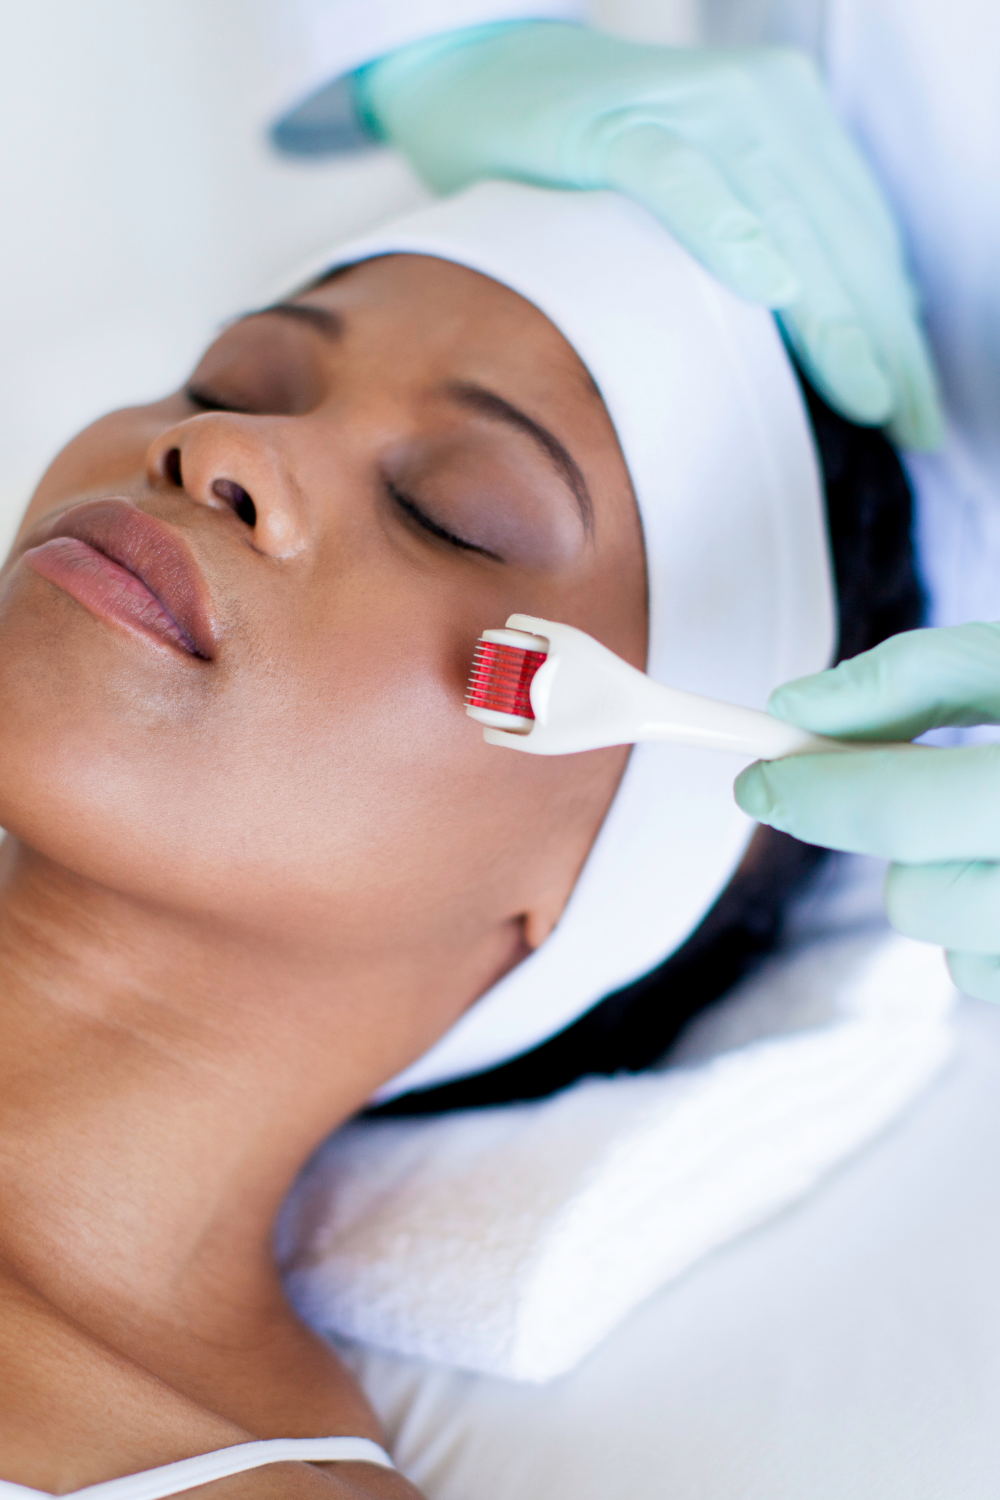 Microneedling Procedure, Benefits, and Other Aspects Explained